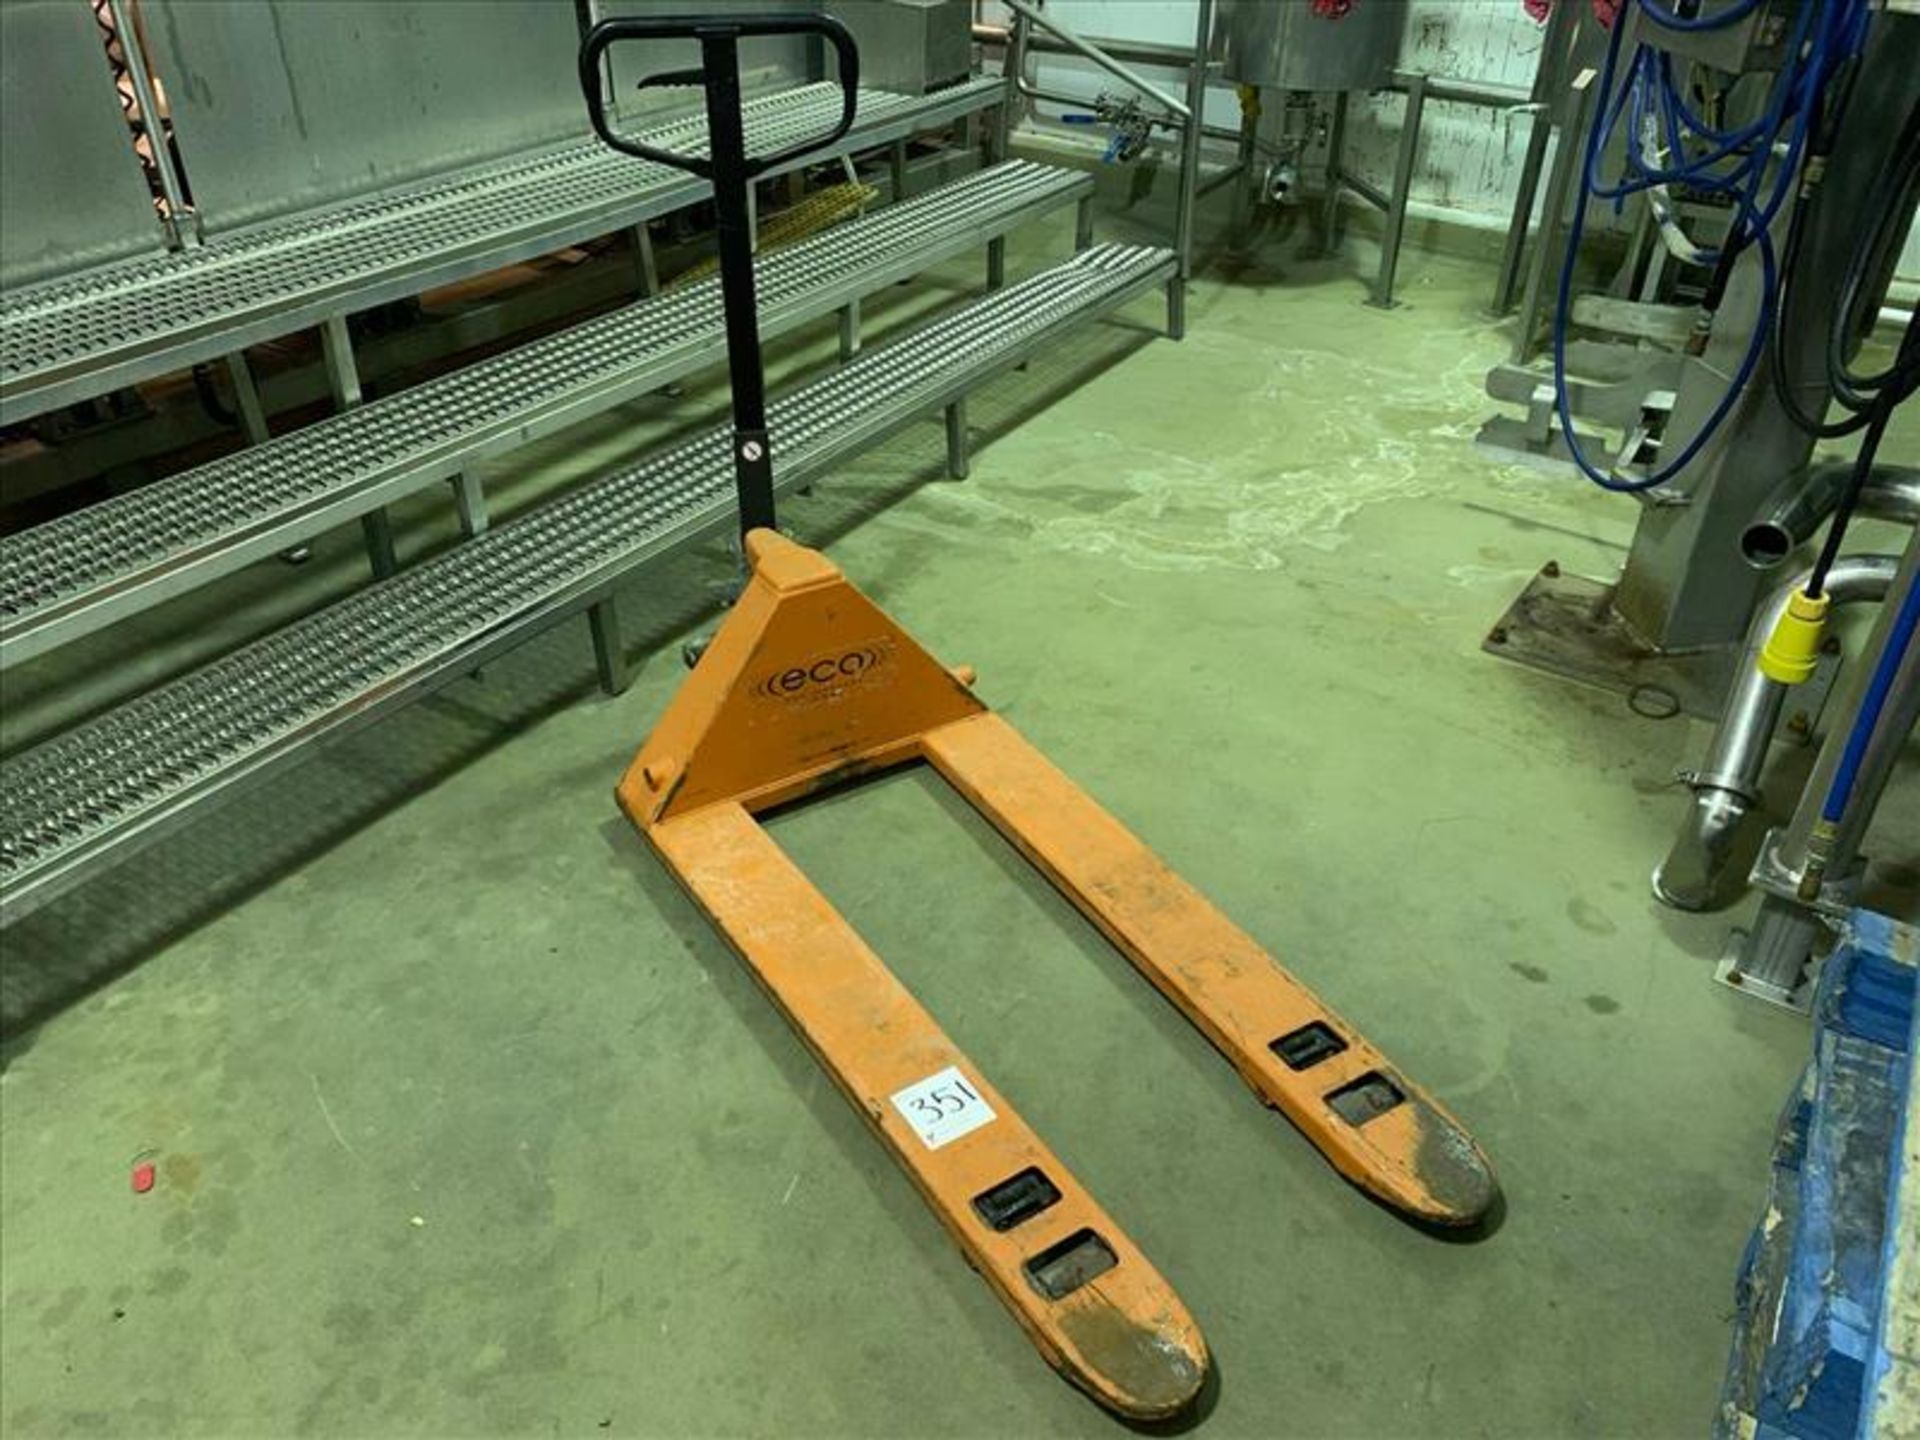 Pallet Jack (delayed removal applies)